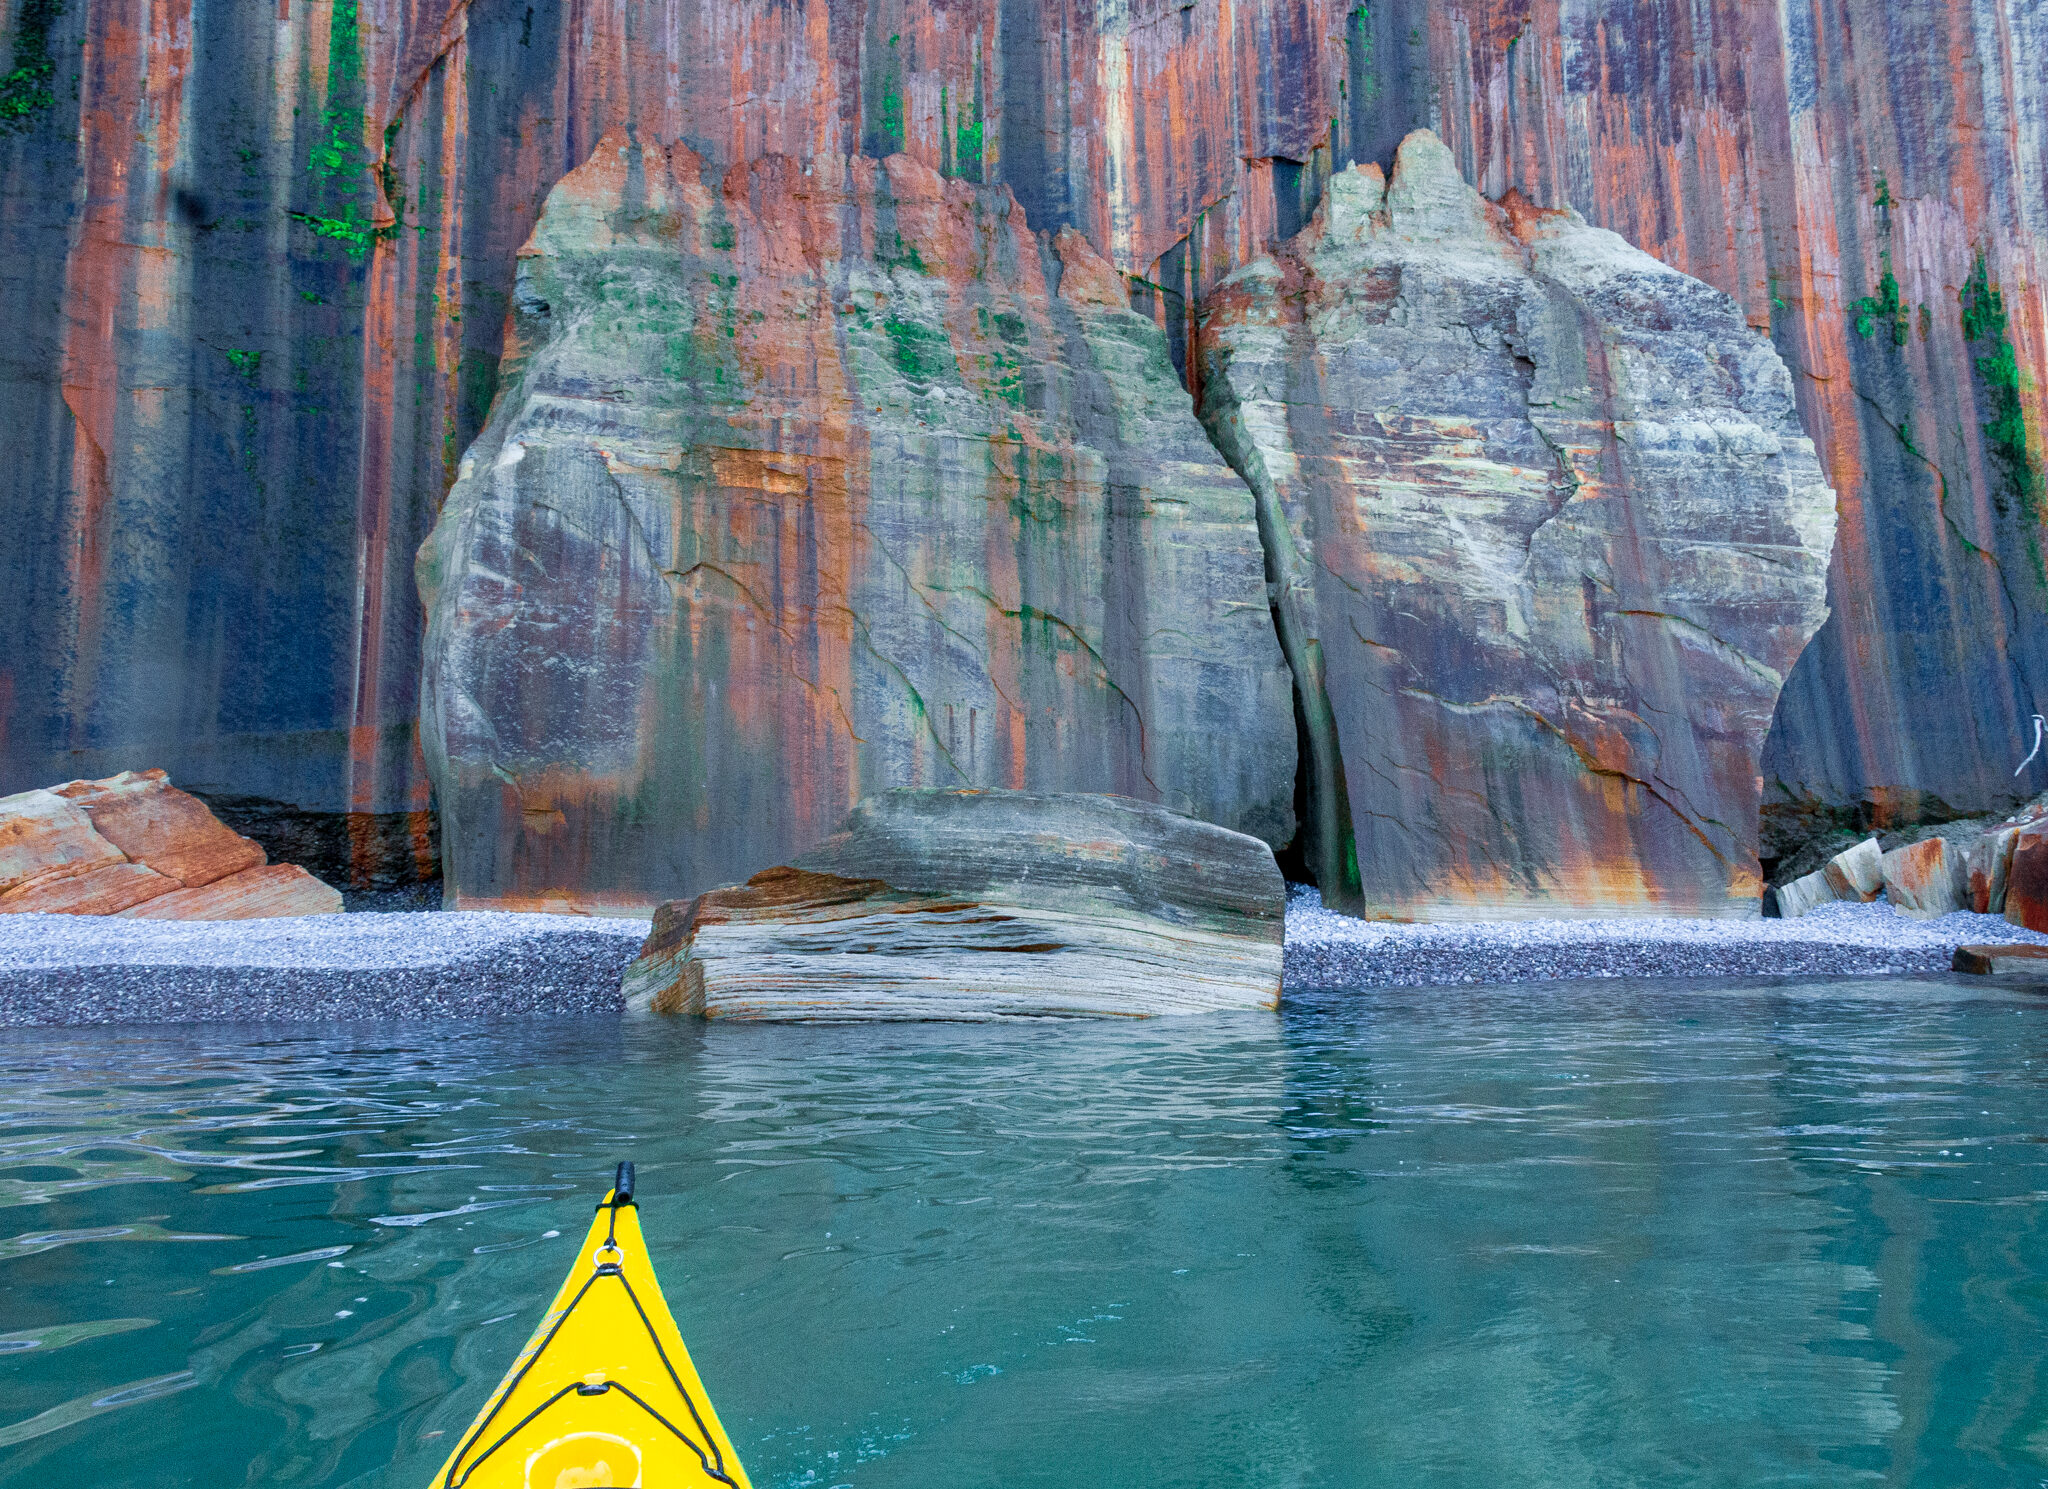 image of a Yellow Sea kayak at the Pictured Rocks Cliffs on Lake Superior